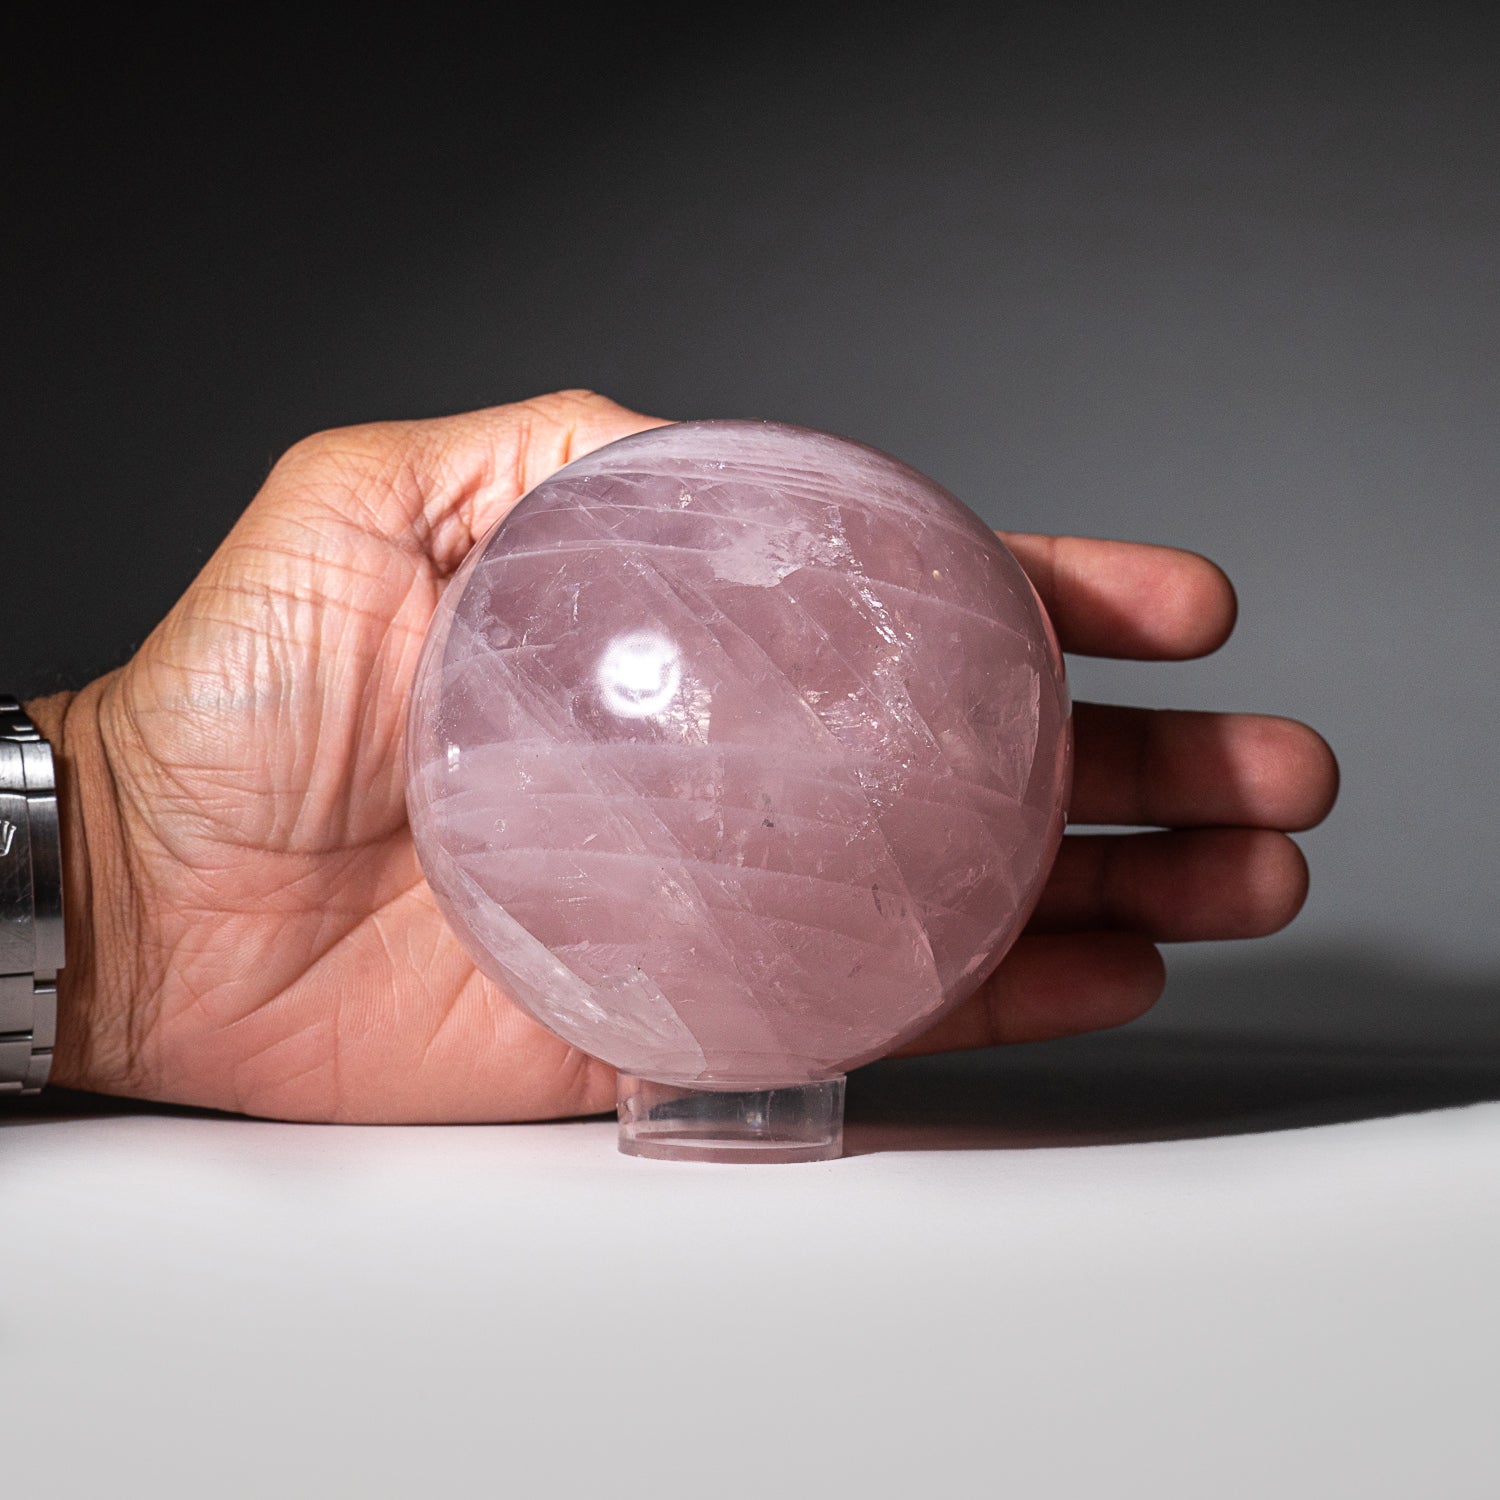 Polished Rose Quartz Sphere from Madagascar (2.2 lbs)